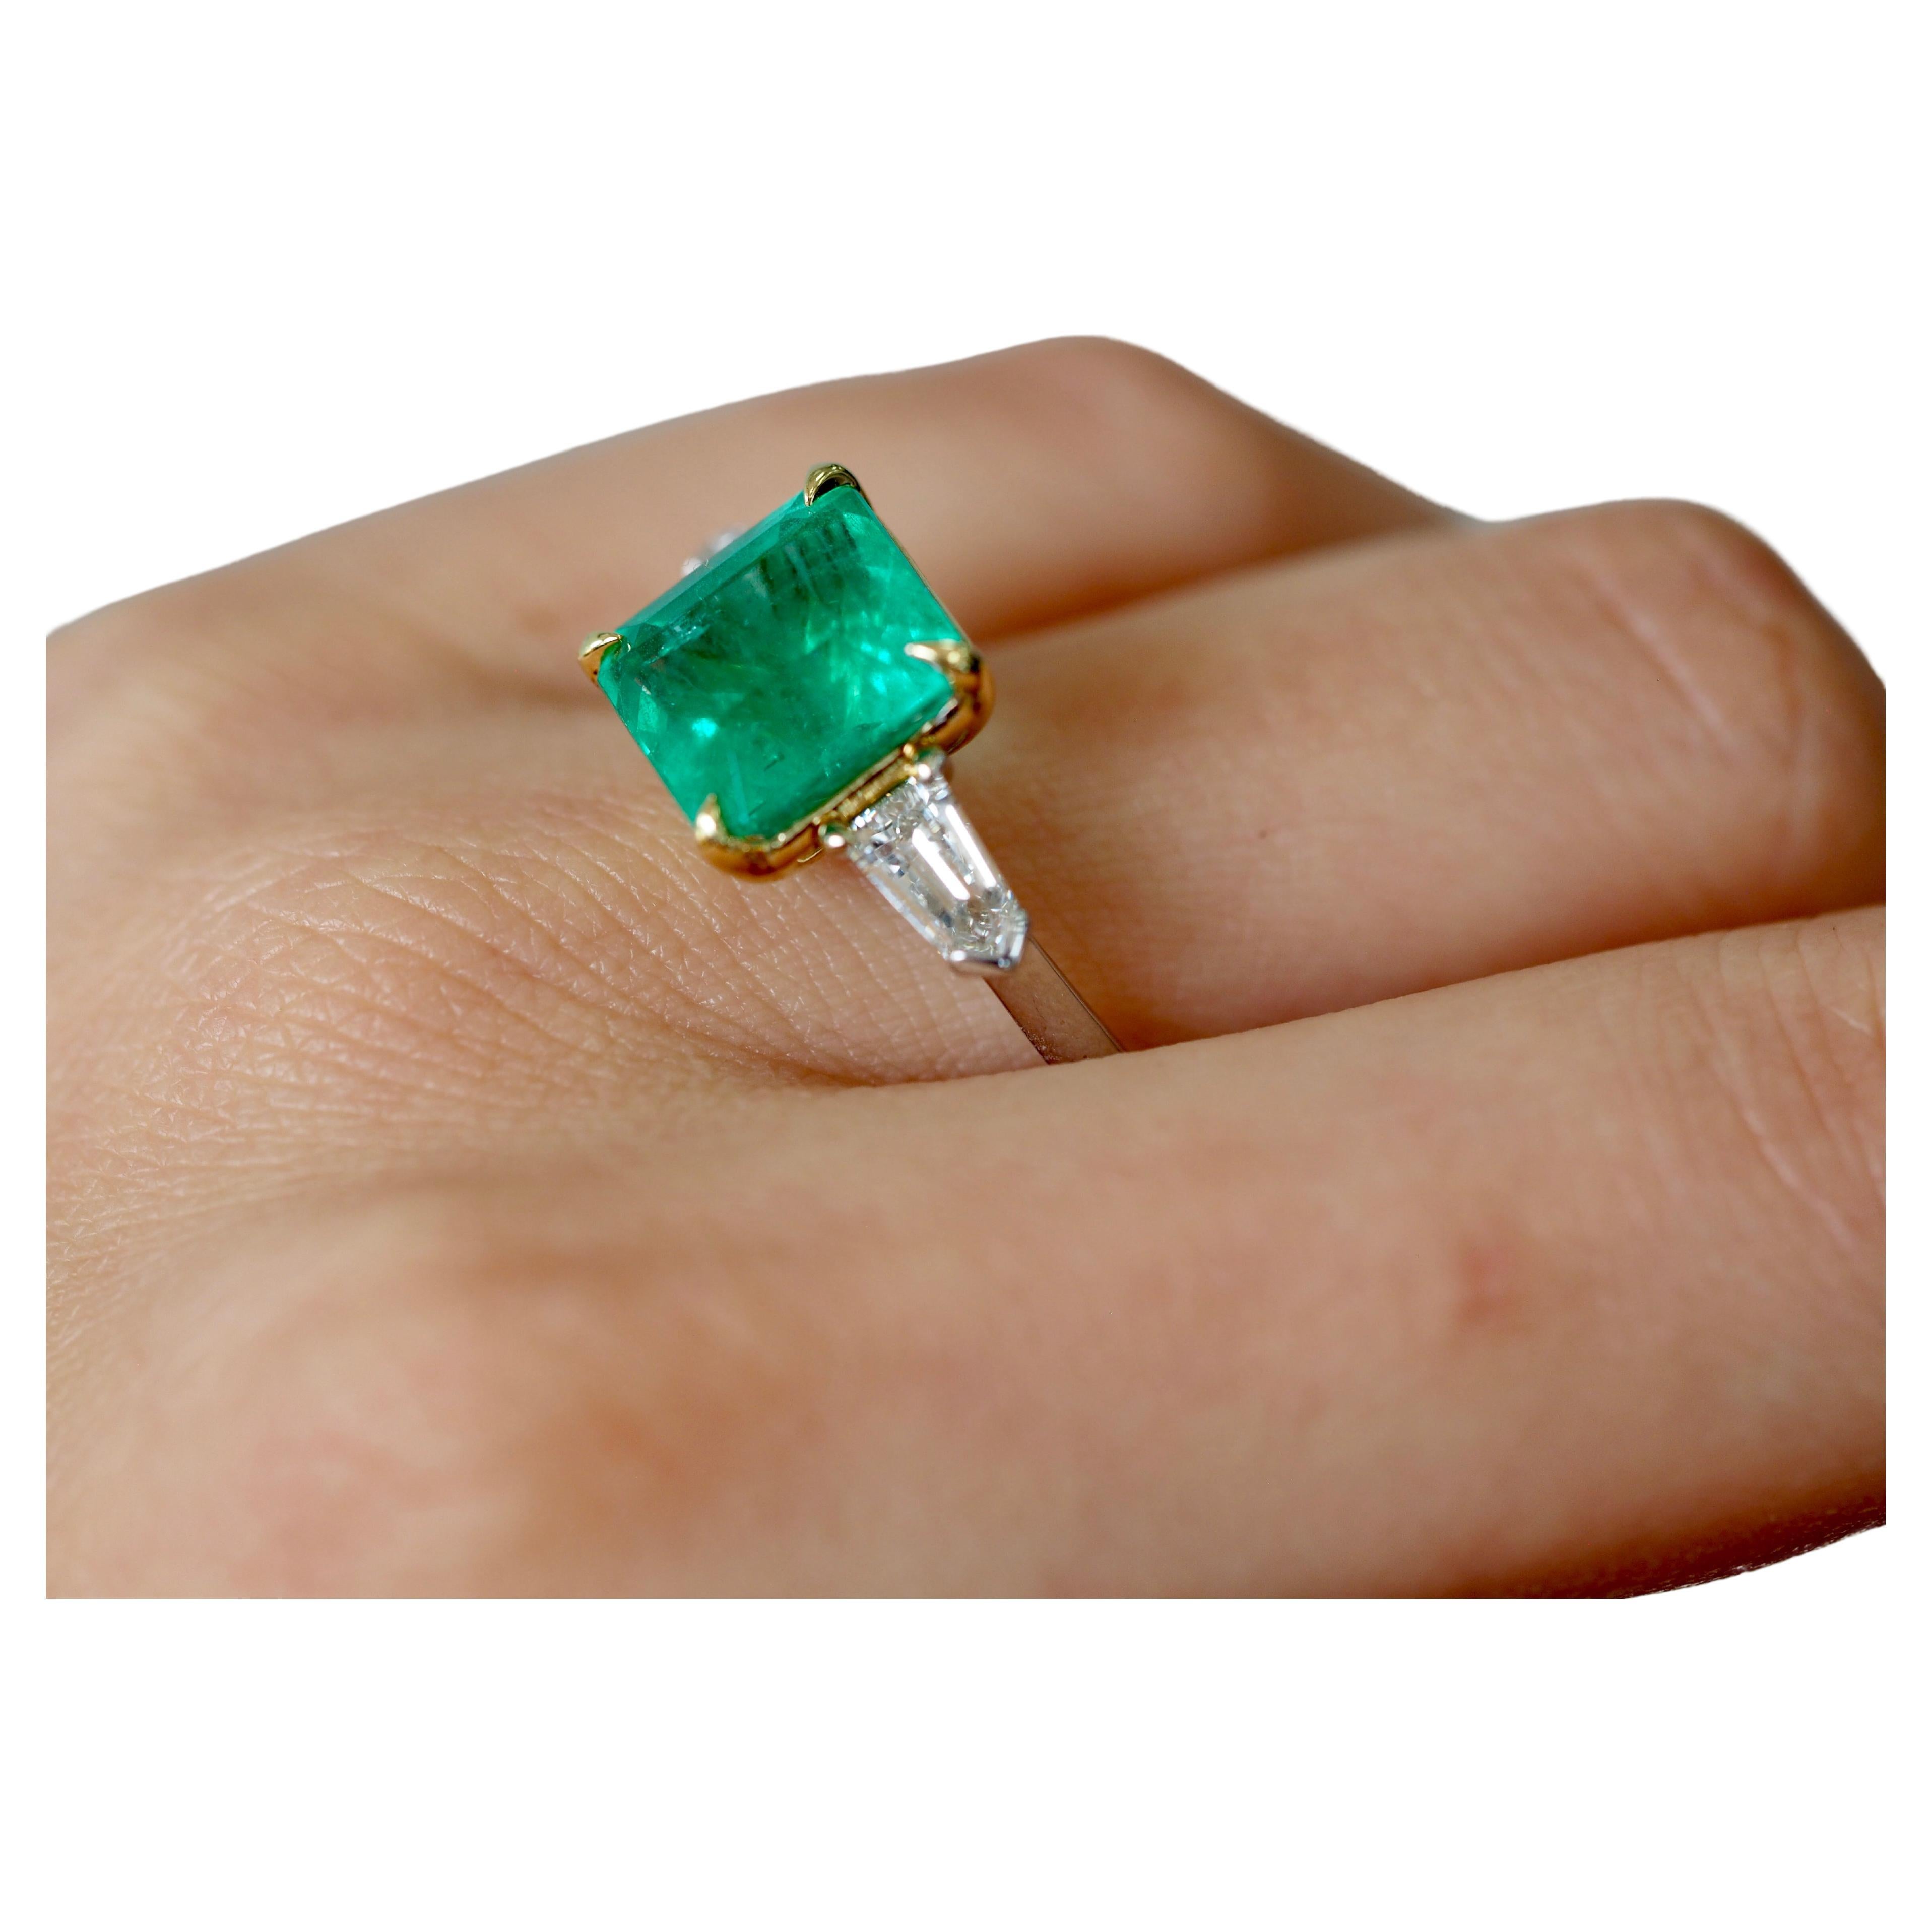 AIGS Certified Zambia Emerald Diamond Ring in 18 Karat White Gold For Sale 1